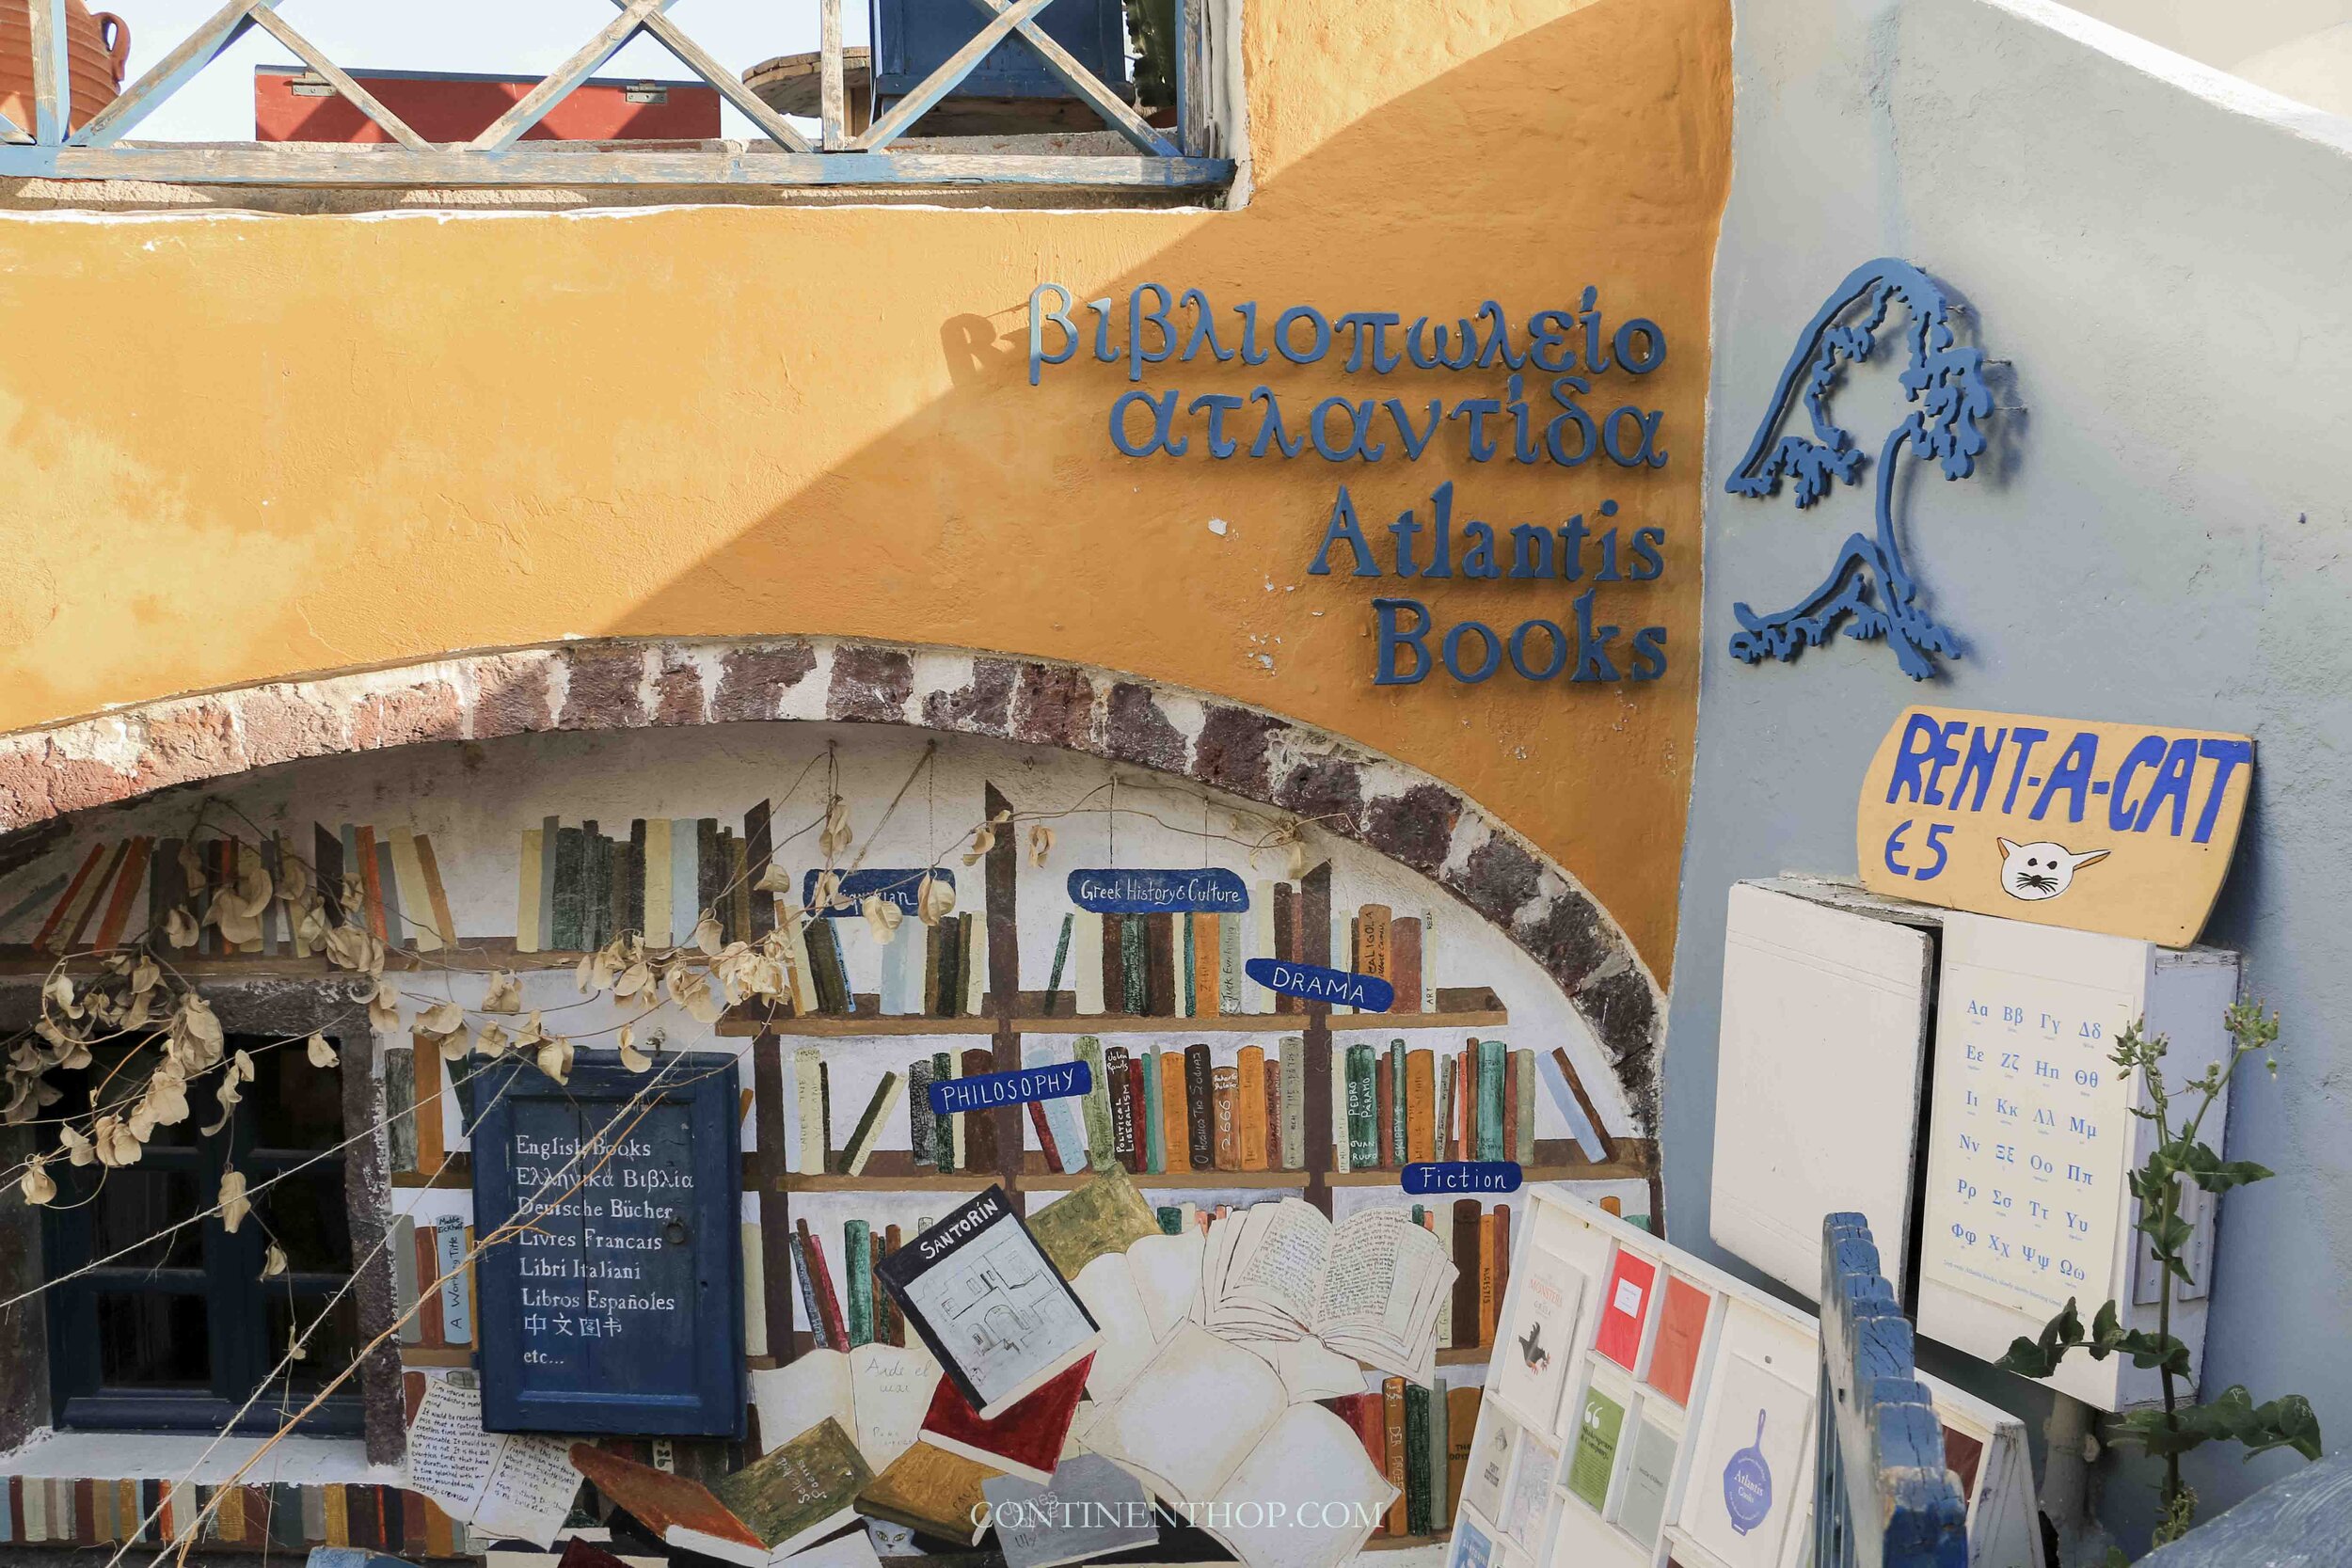 Things to do in Oia Santorini - visit A colorful bookstore called Atlantis